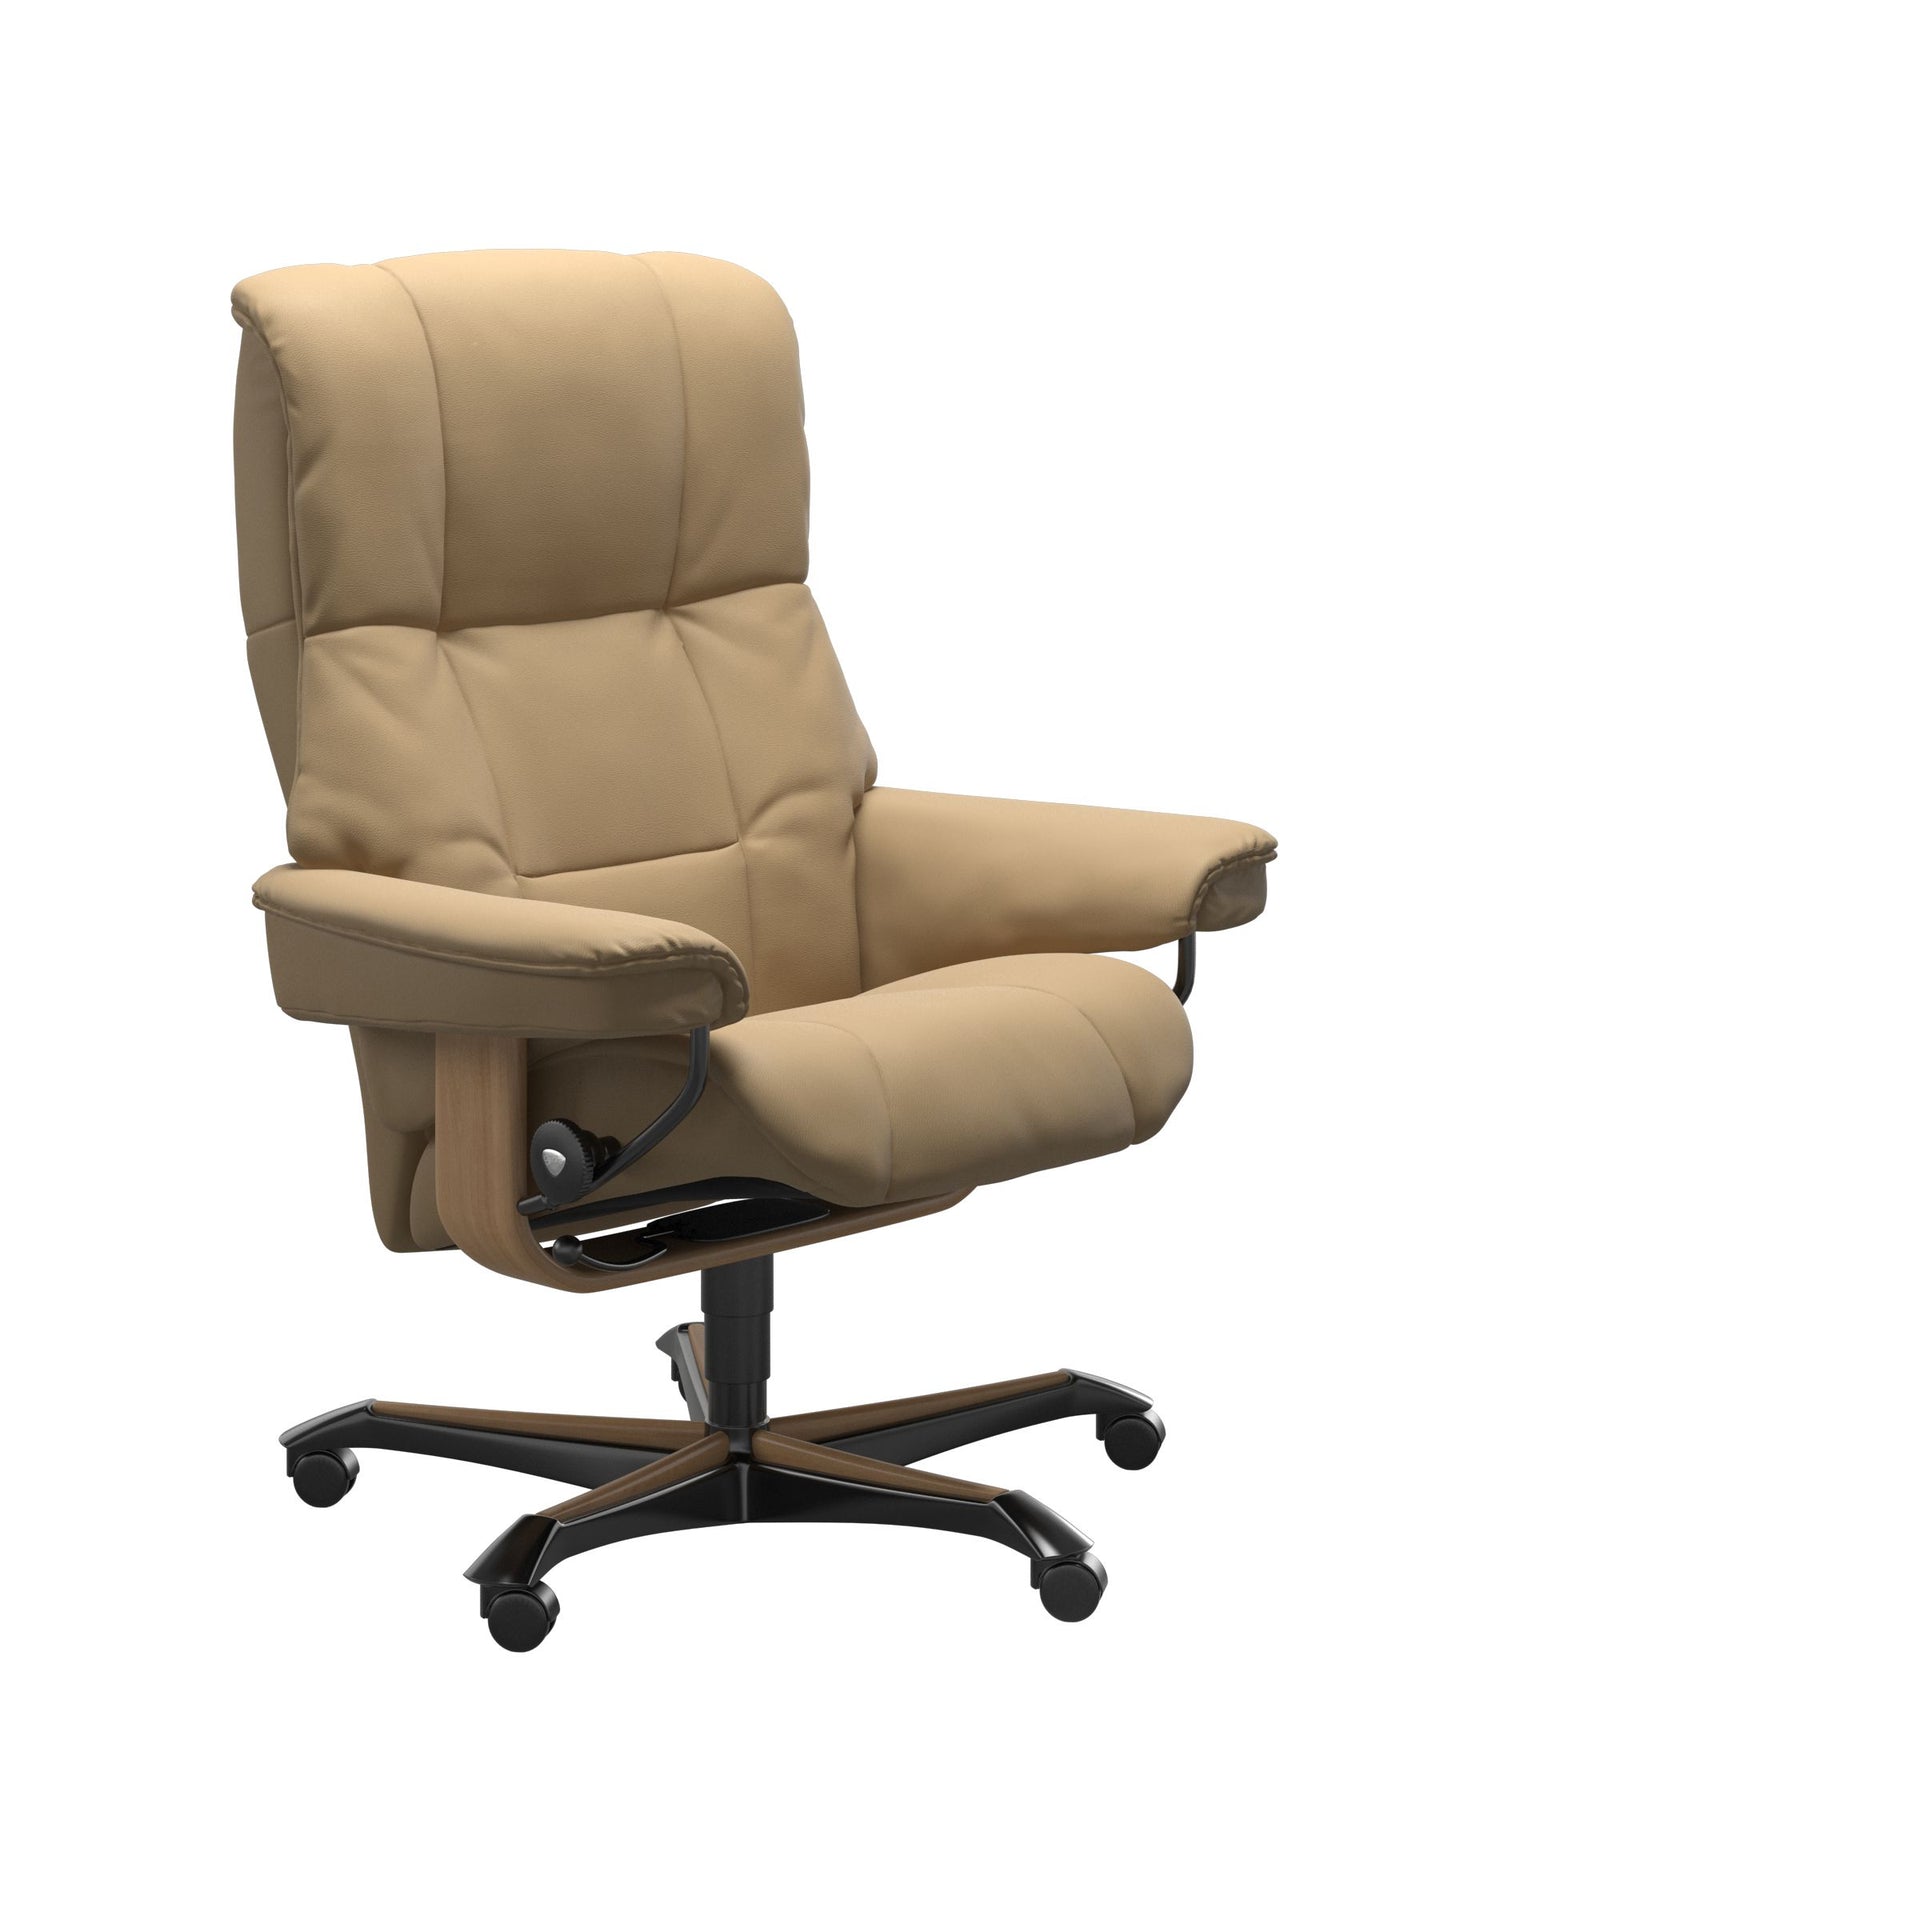 Stressless Home Office Chair